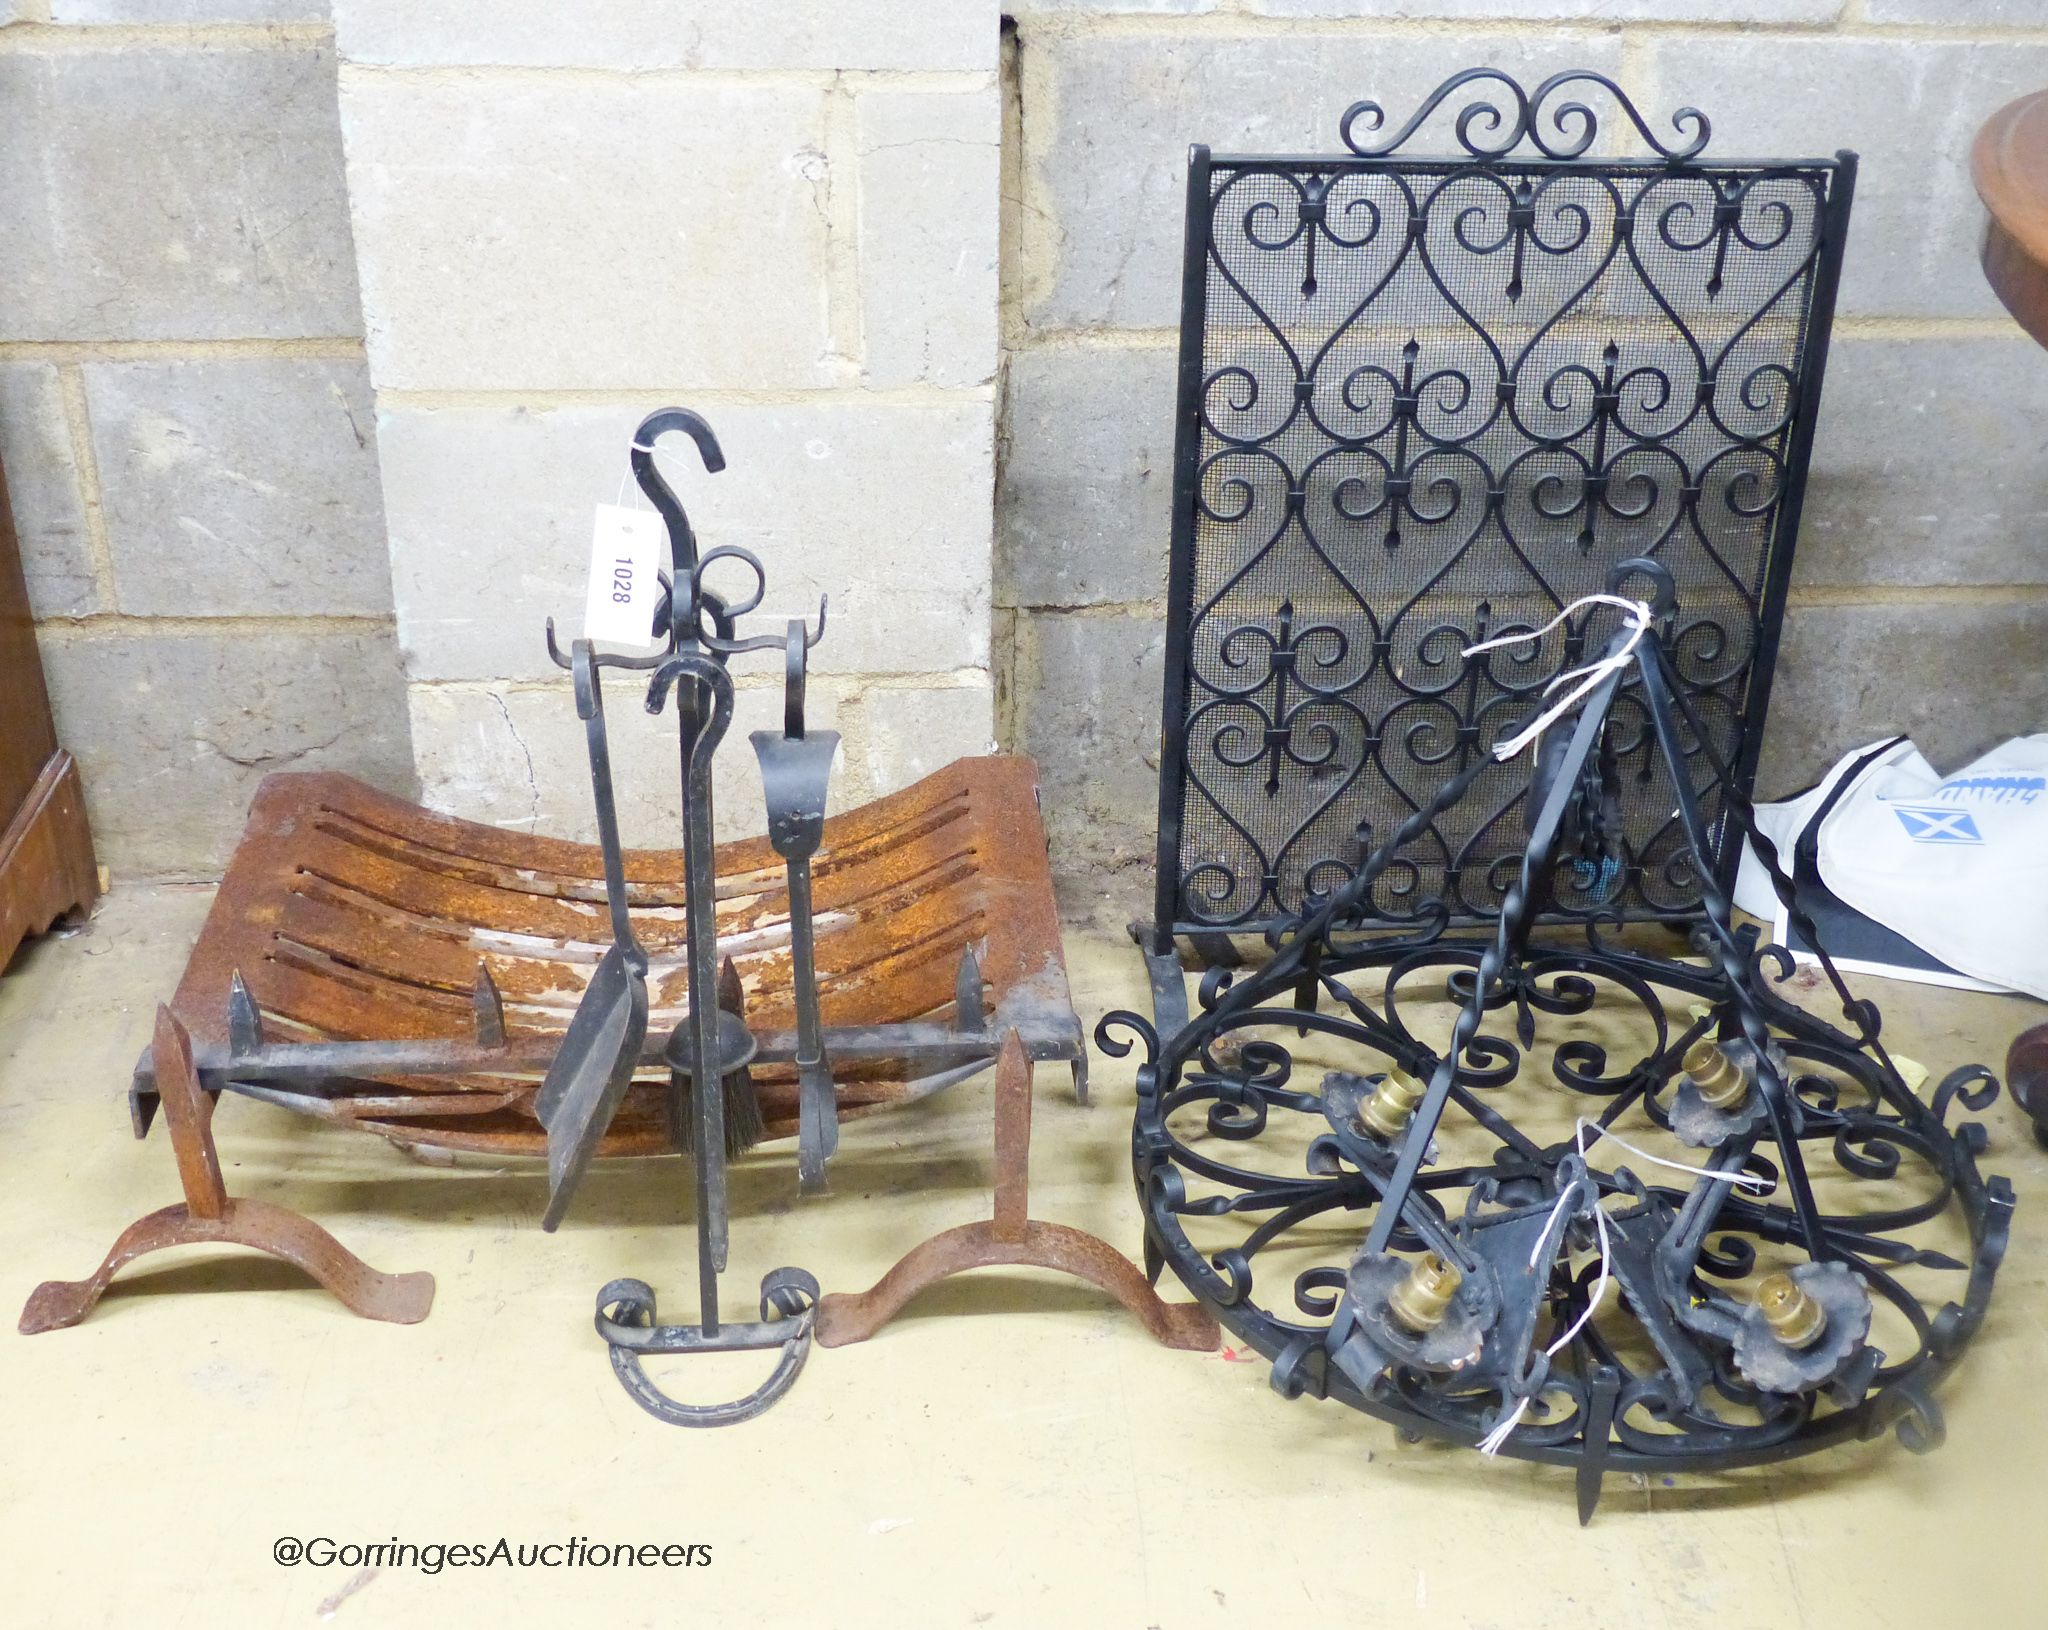 A cast and wrought iron fire grate, spark guard, fire implements, a light fitting and wall lights